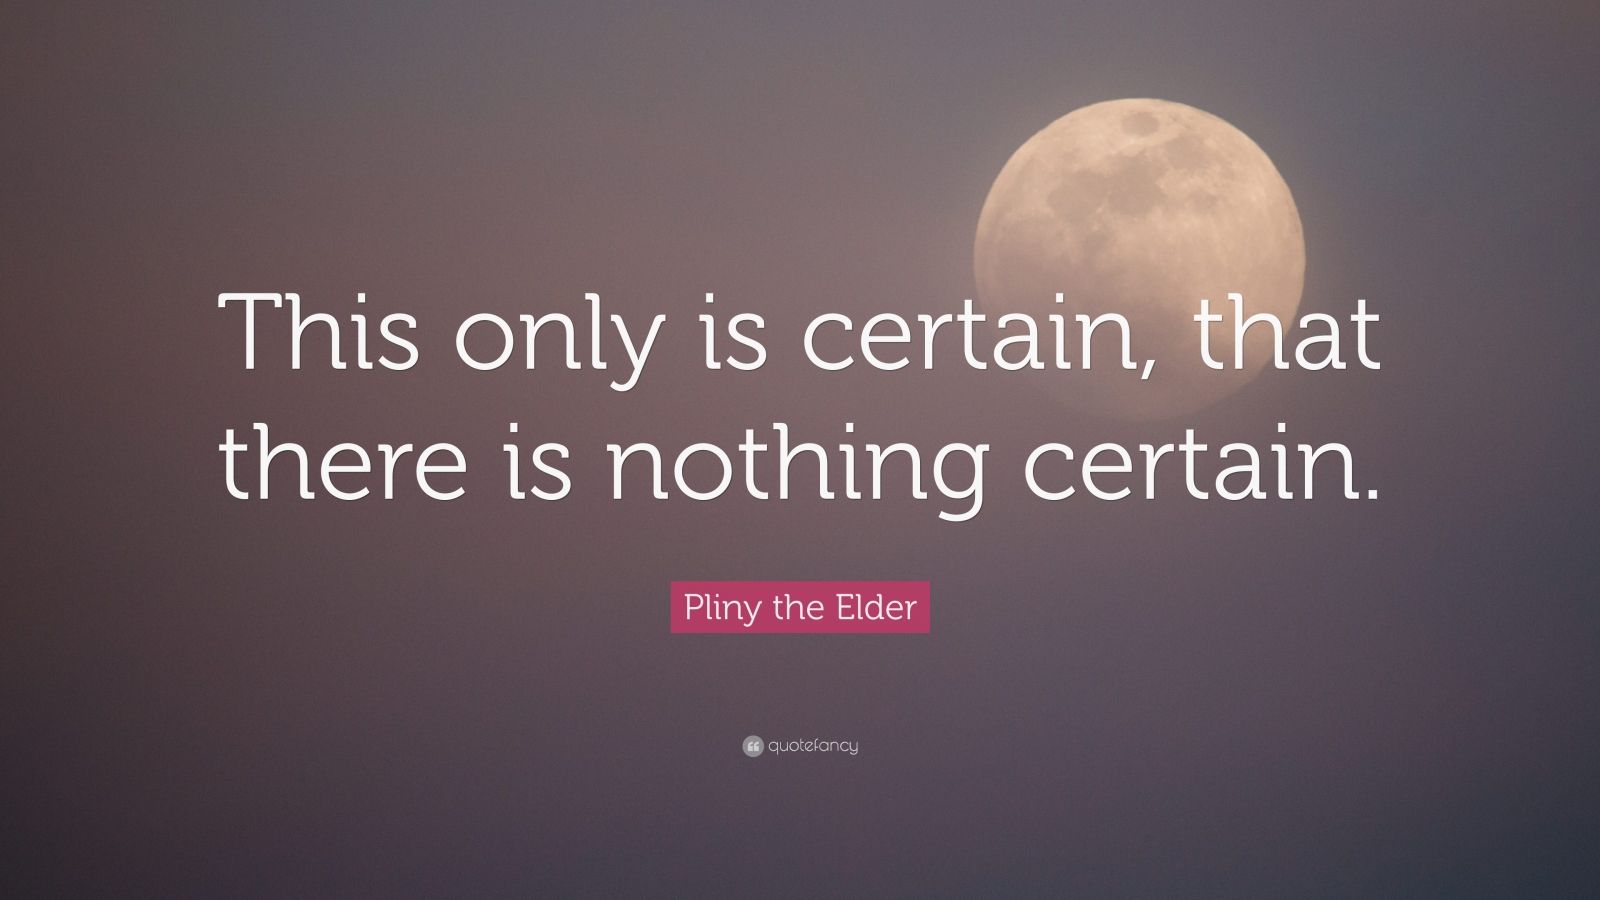 Top 100 Pliny the Elder Quotes | 2021 Edition | Free Images - QuoteFancy